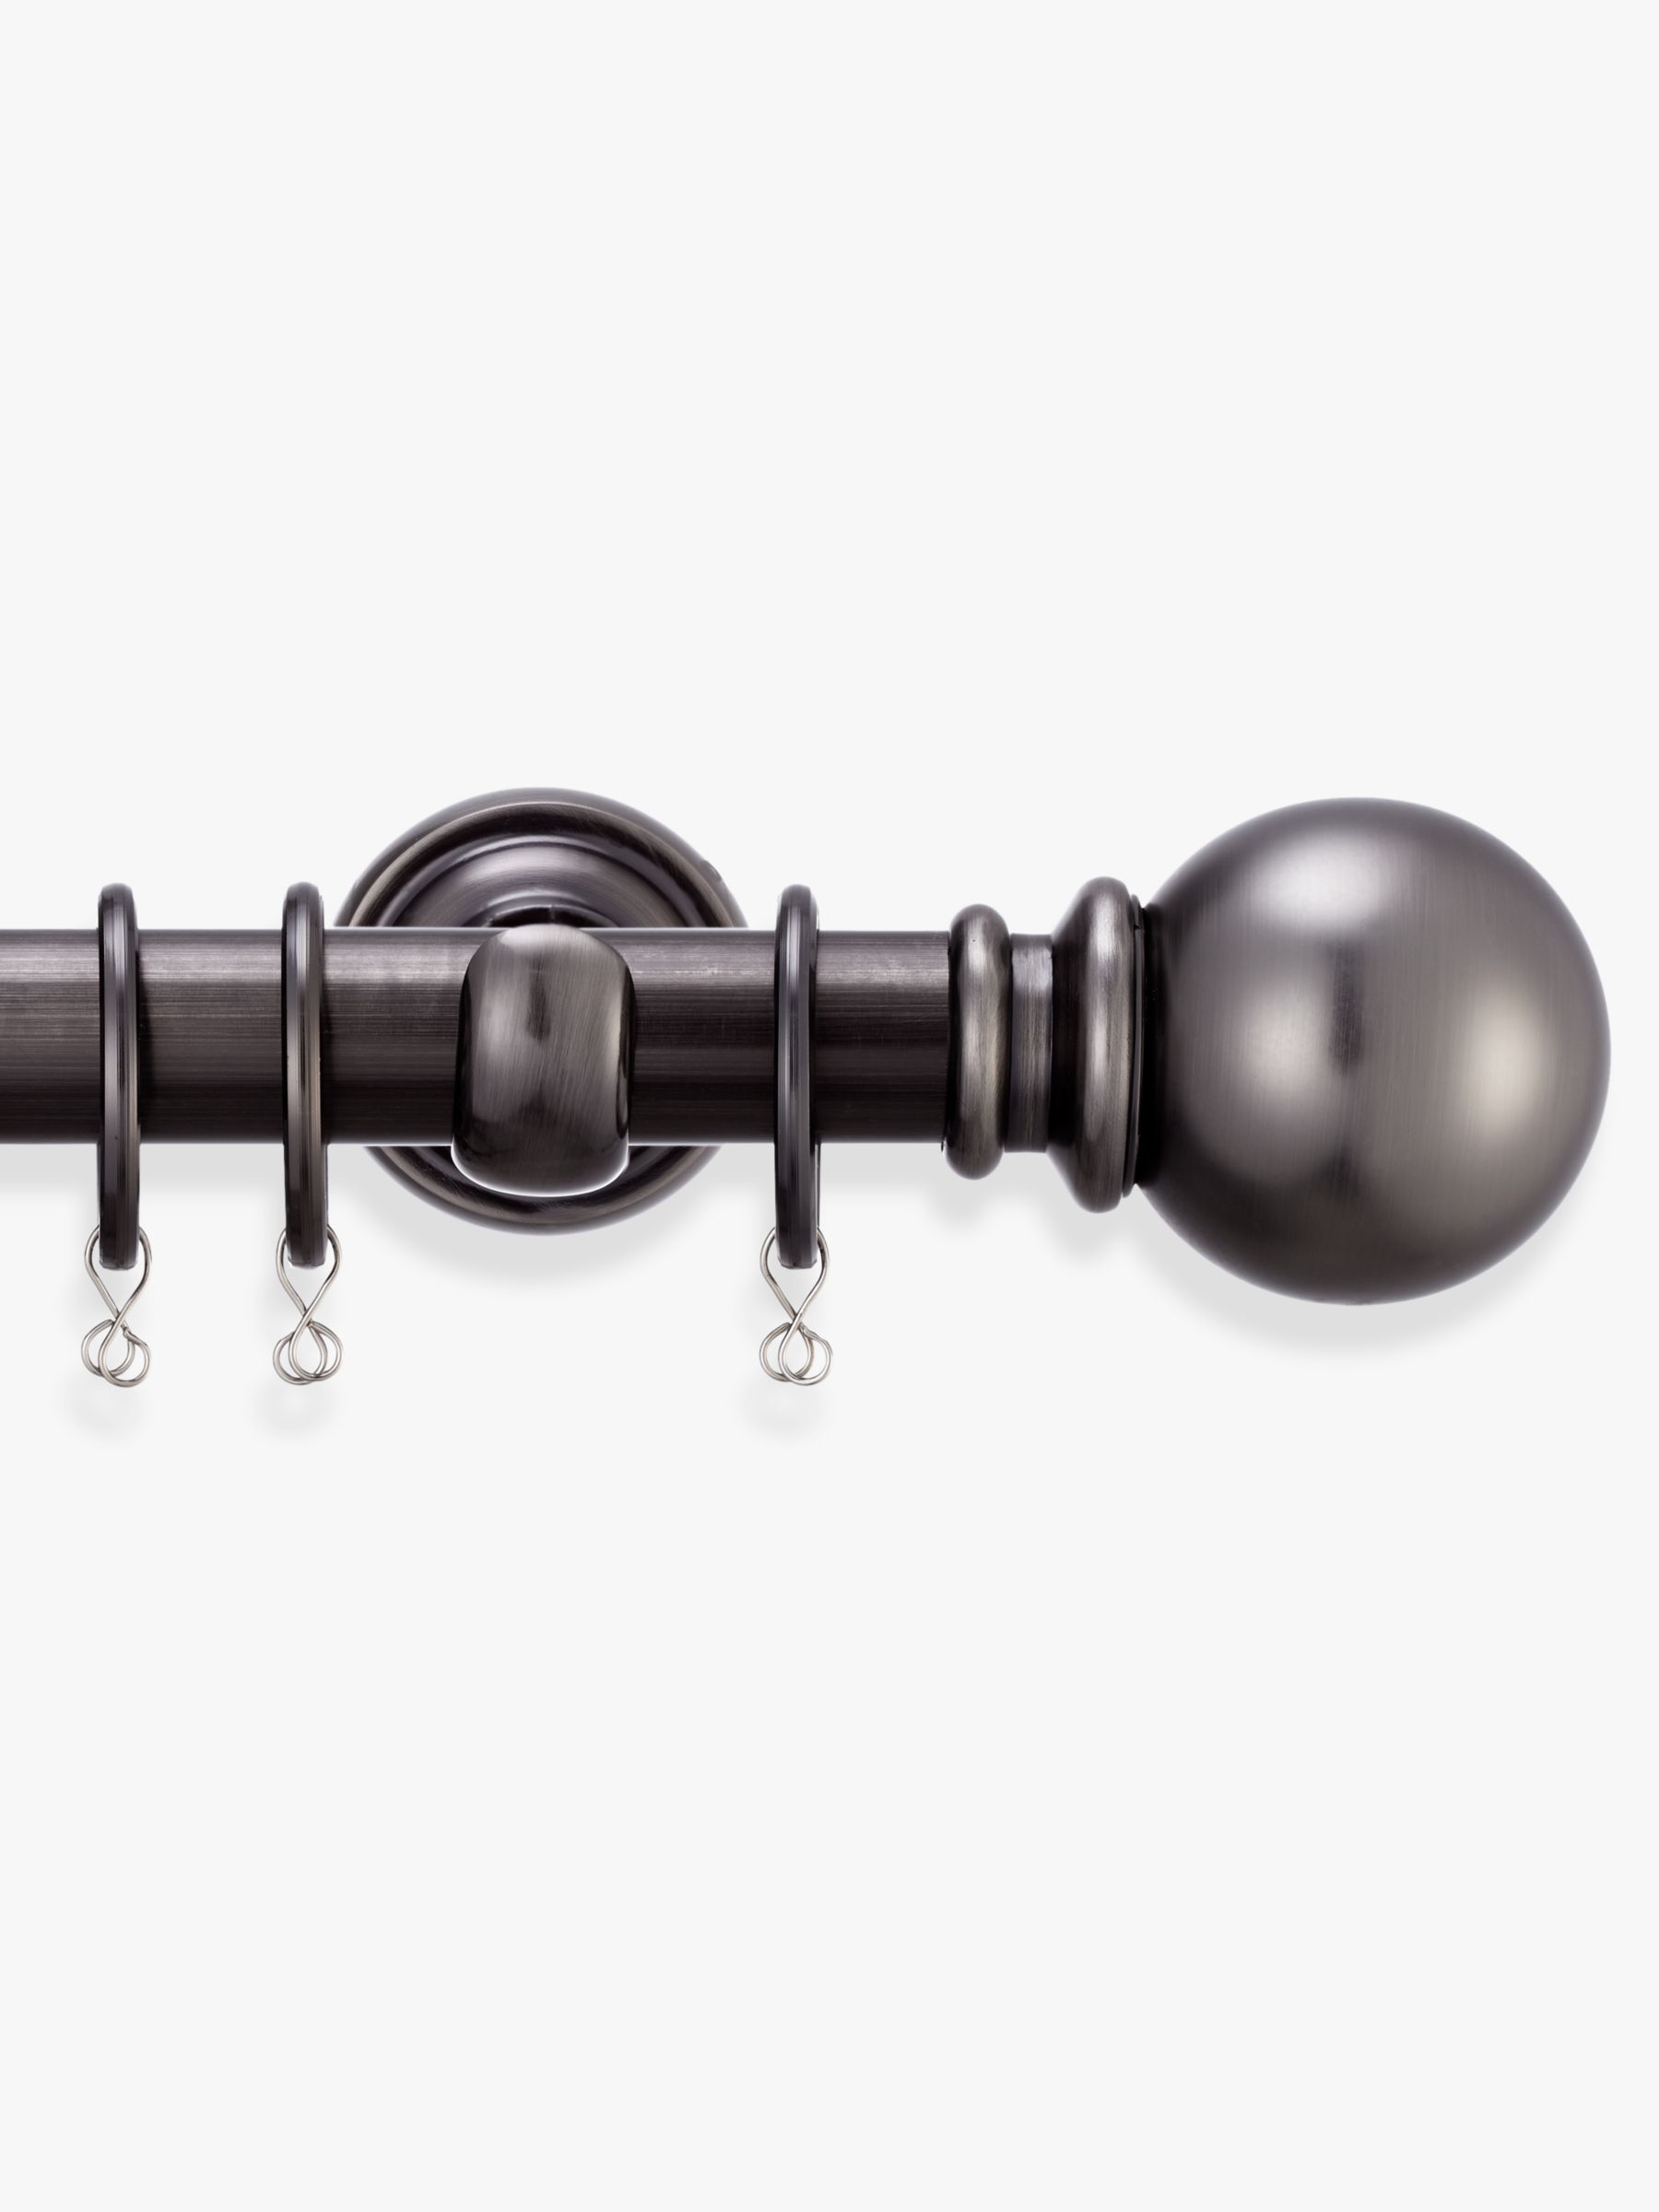 Details about   Cream 28mm Dia Metal Curtain Pole Set With Ball Finials 5 Sizes 120 to 360cm 